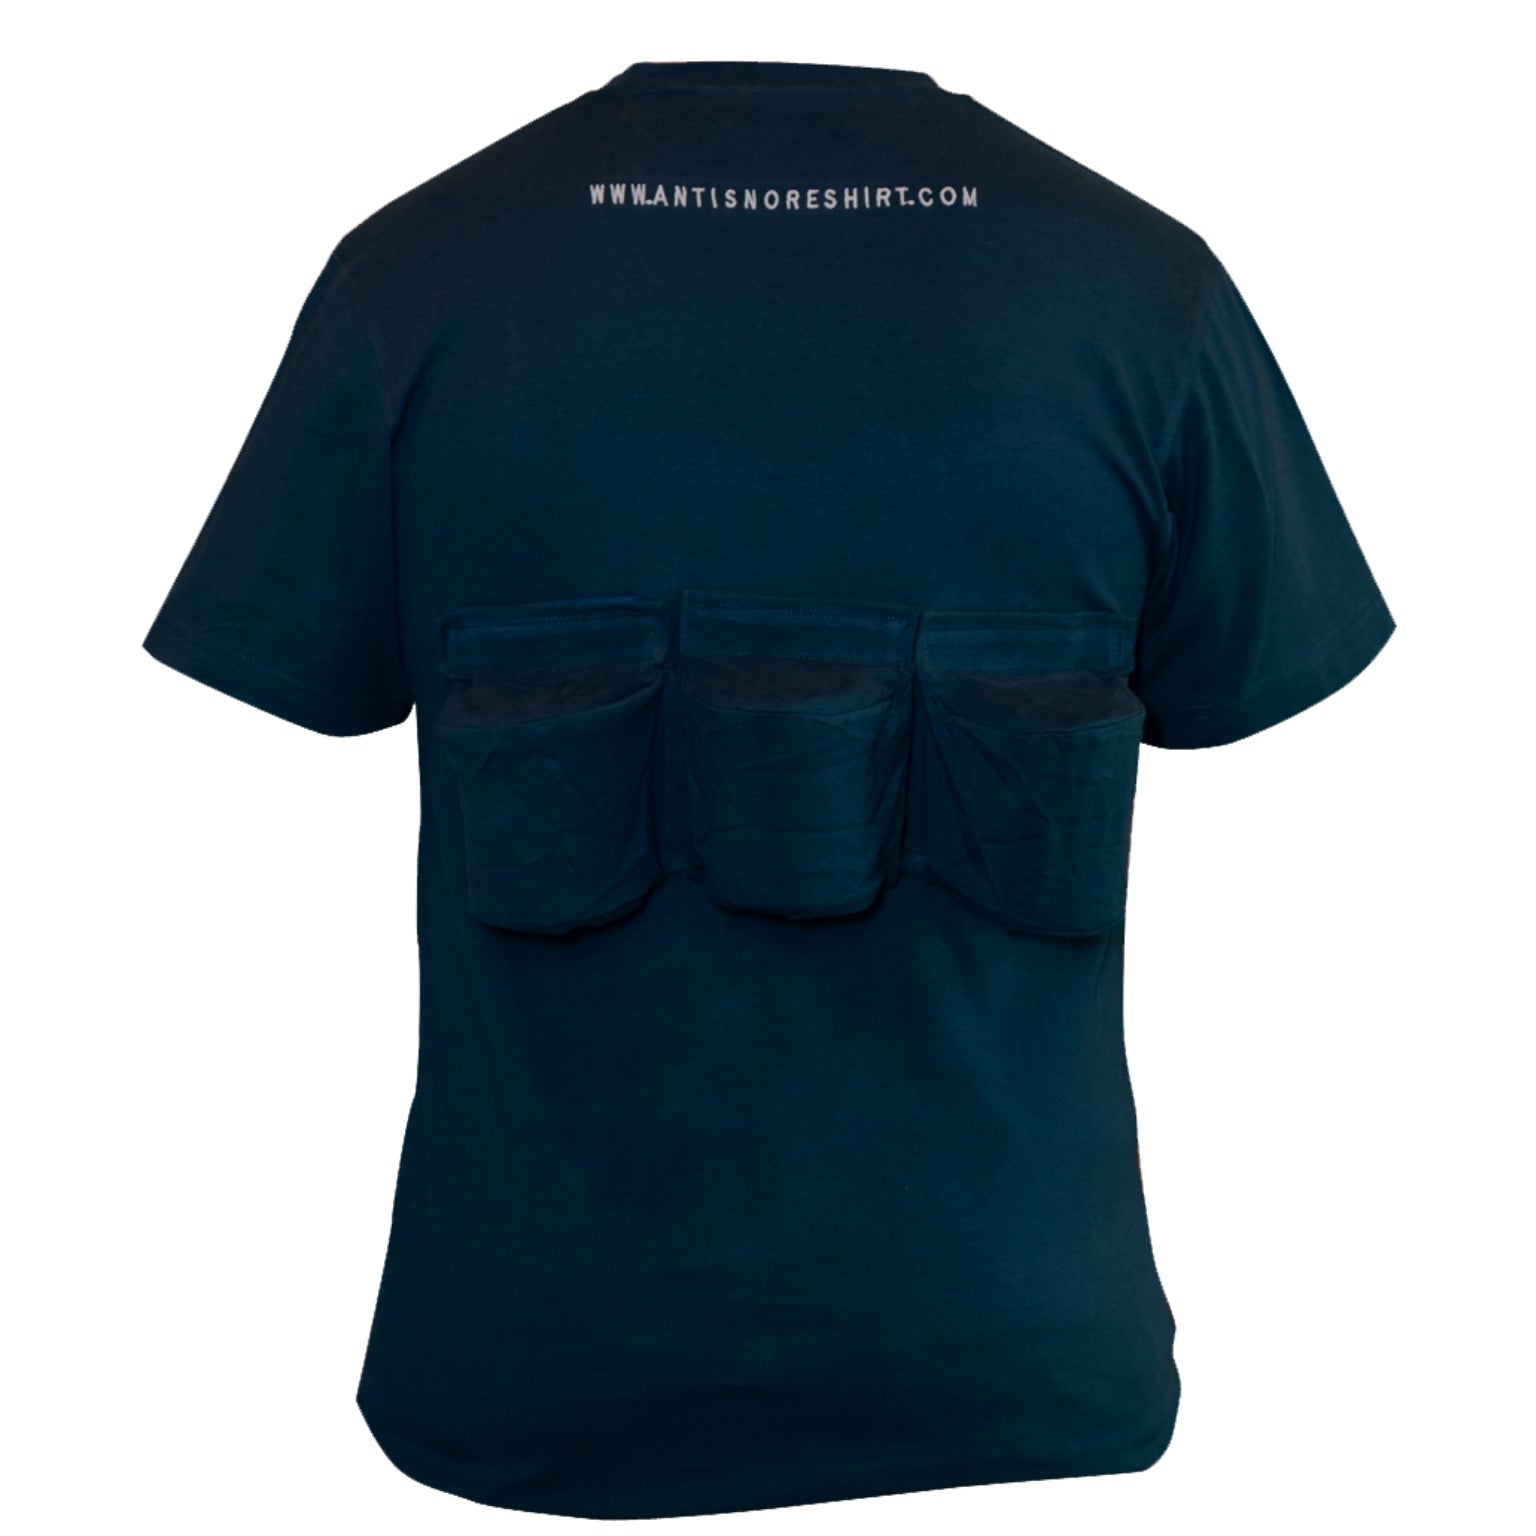 Anti Snore T-shirt in blue back view 3 inflatable bumpers